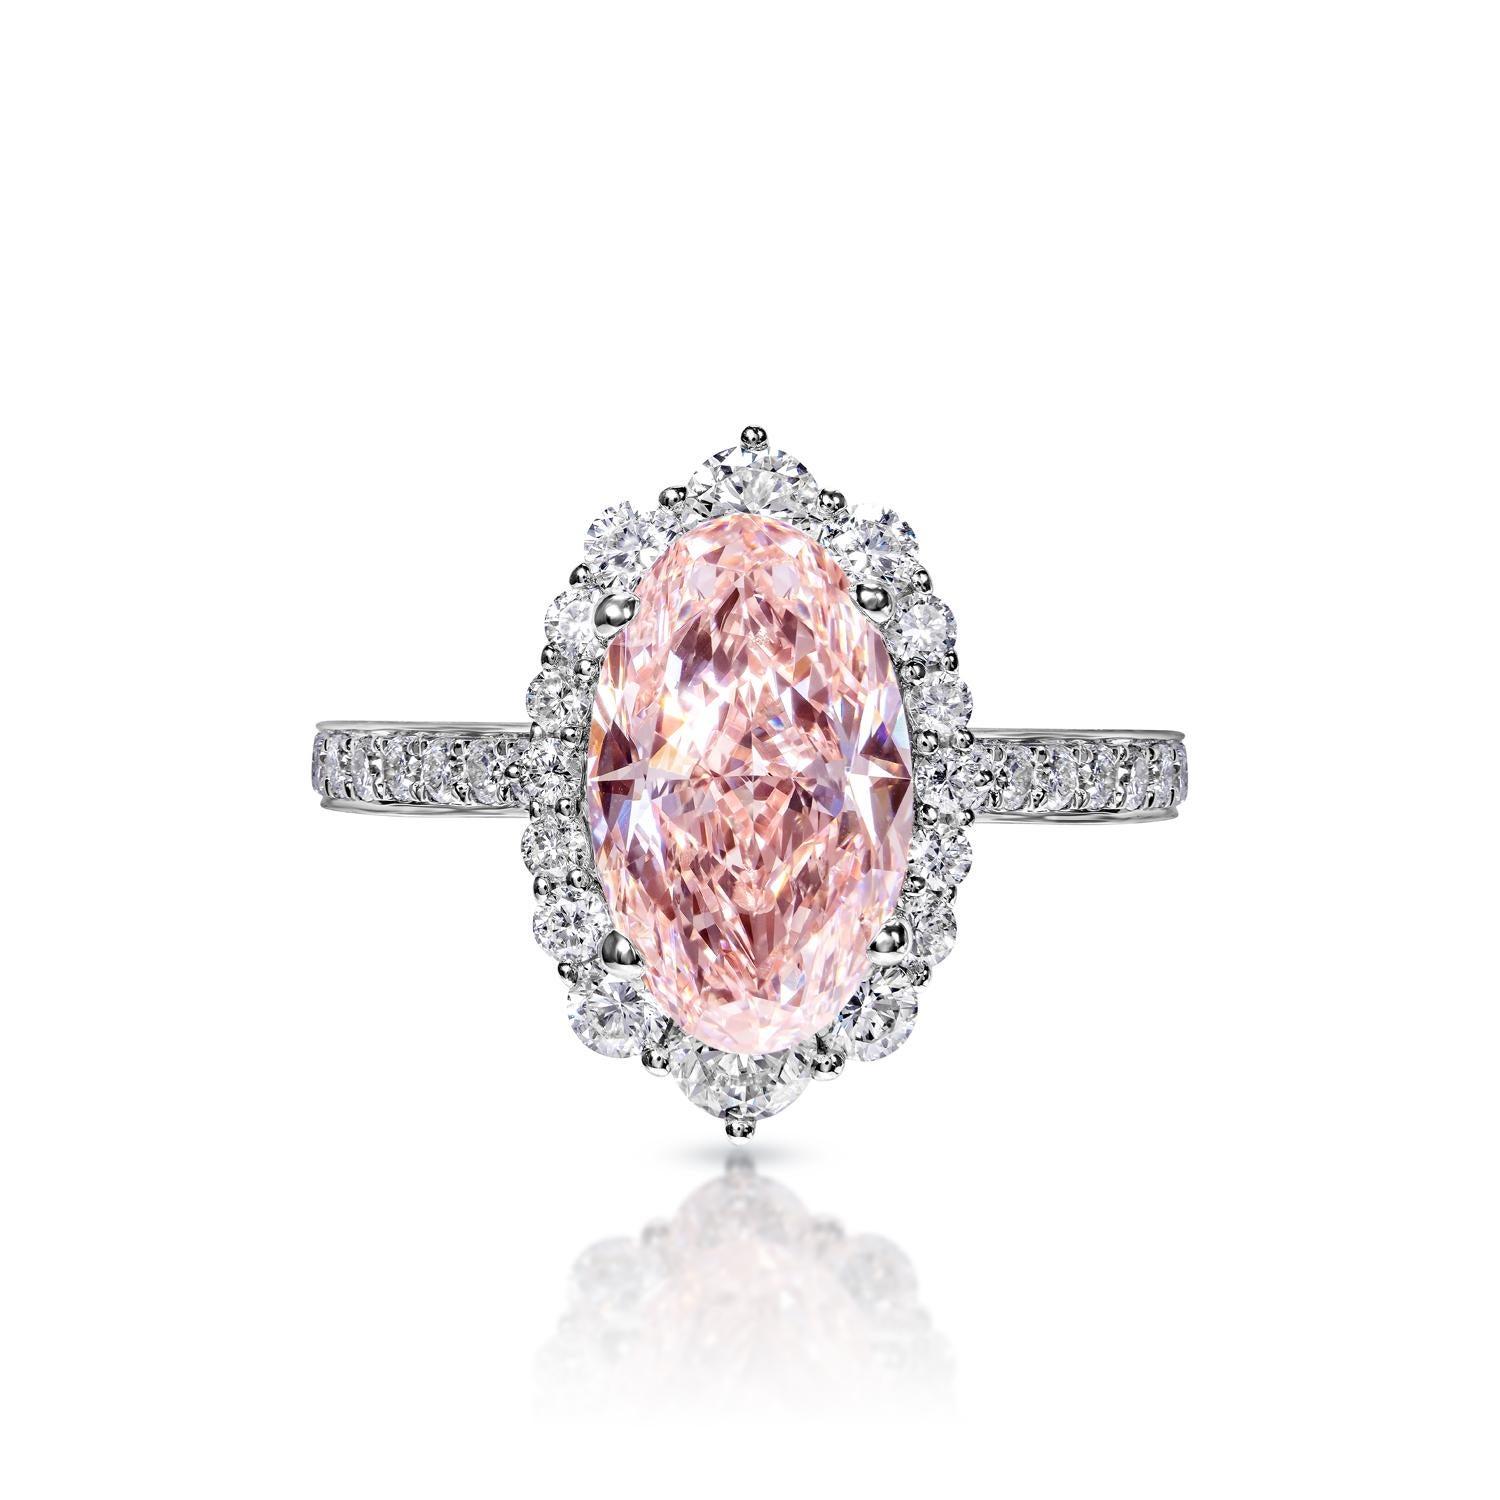 GIA Certified

Earth Mined Center Diamond:
Carat Weight: 2.14 Carats
Color: Fancy Intense Pink*
Clarity: VS1
Style: Oval Cut

*This Diamond has been treated by one or more processes to change its color

Carat Weight: 0.84 Carats
Shape: Round